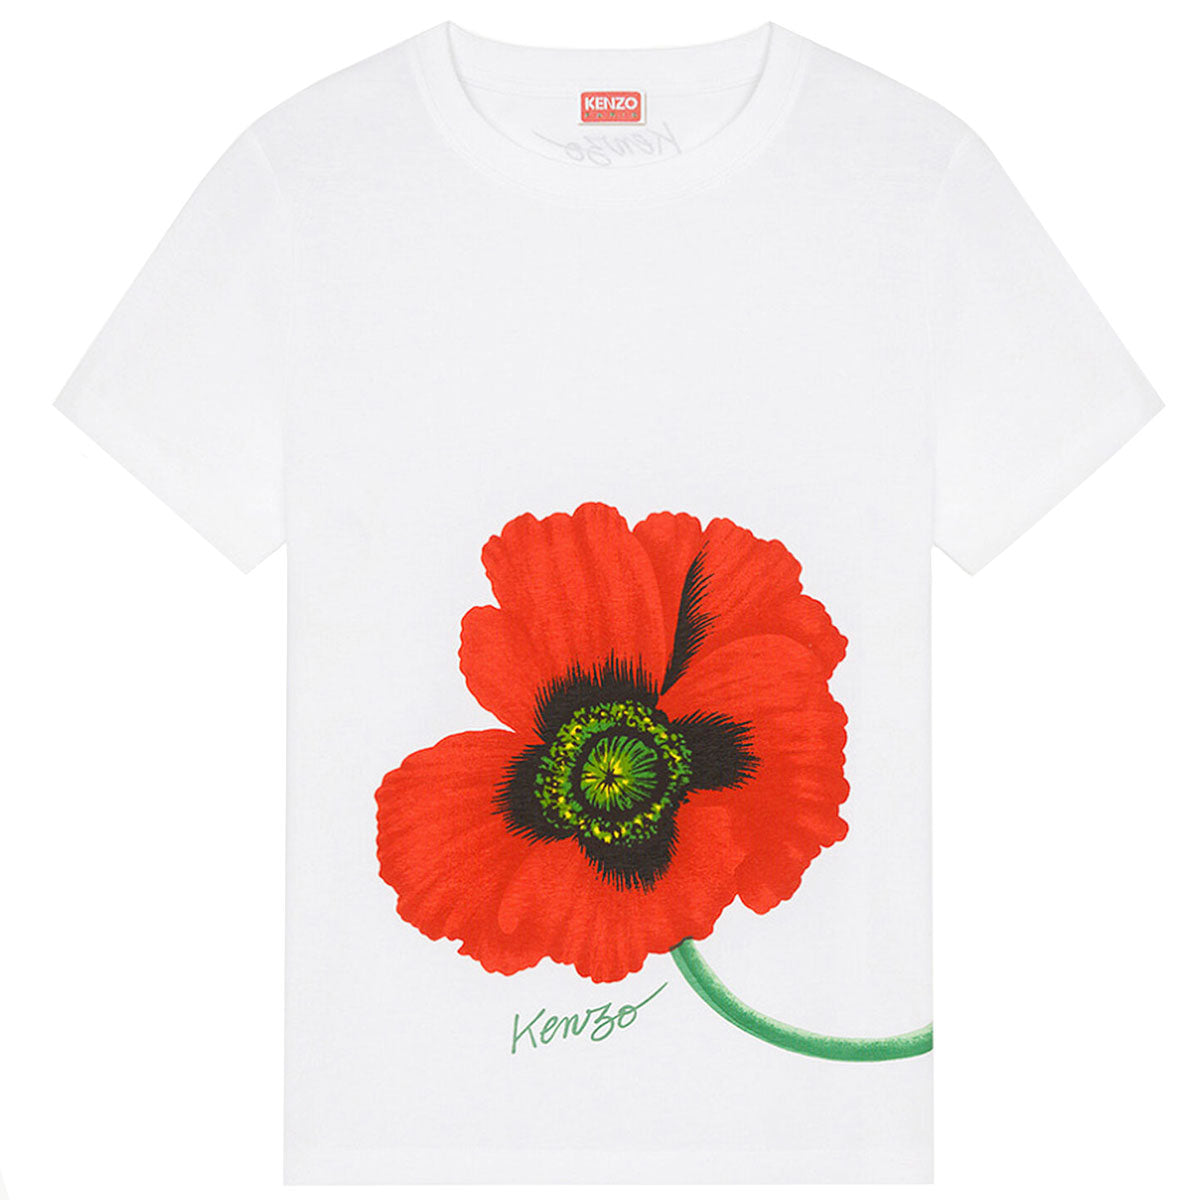 'KENZO POPPY' Tシャツ - Why are you here?